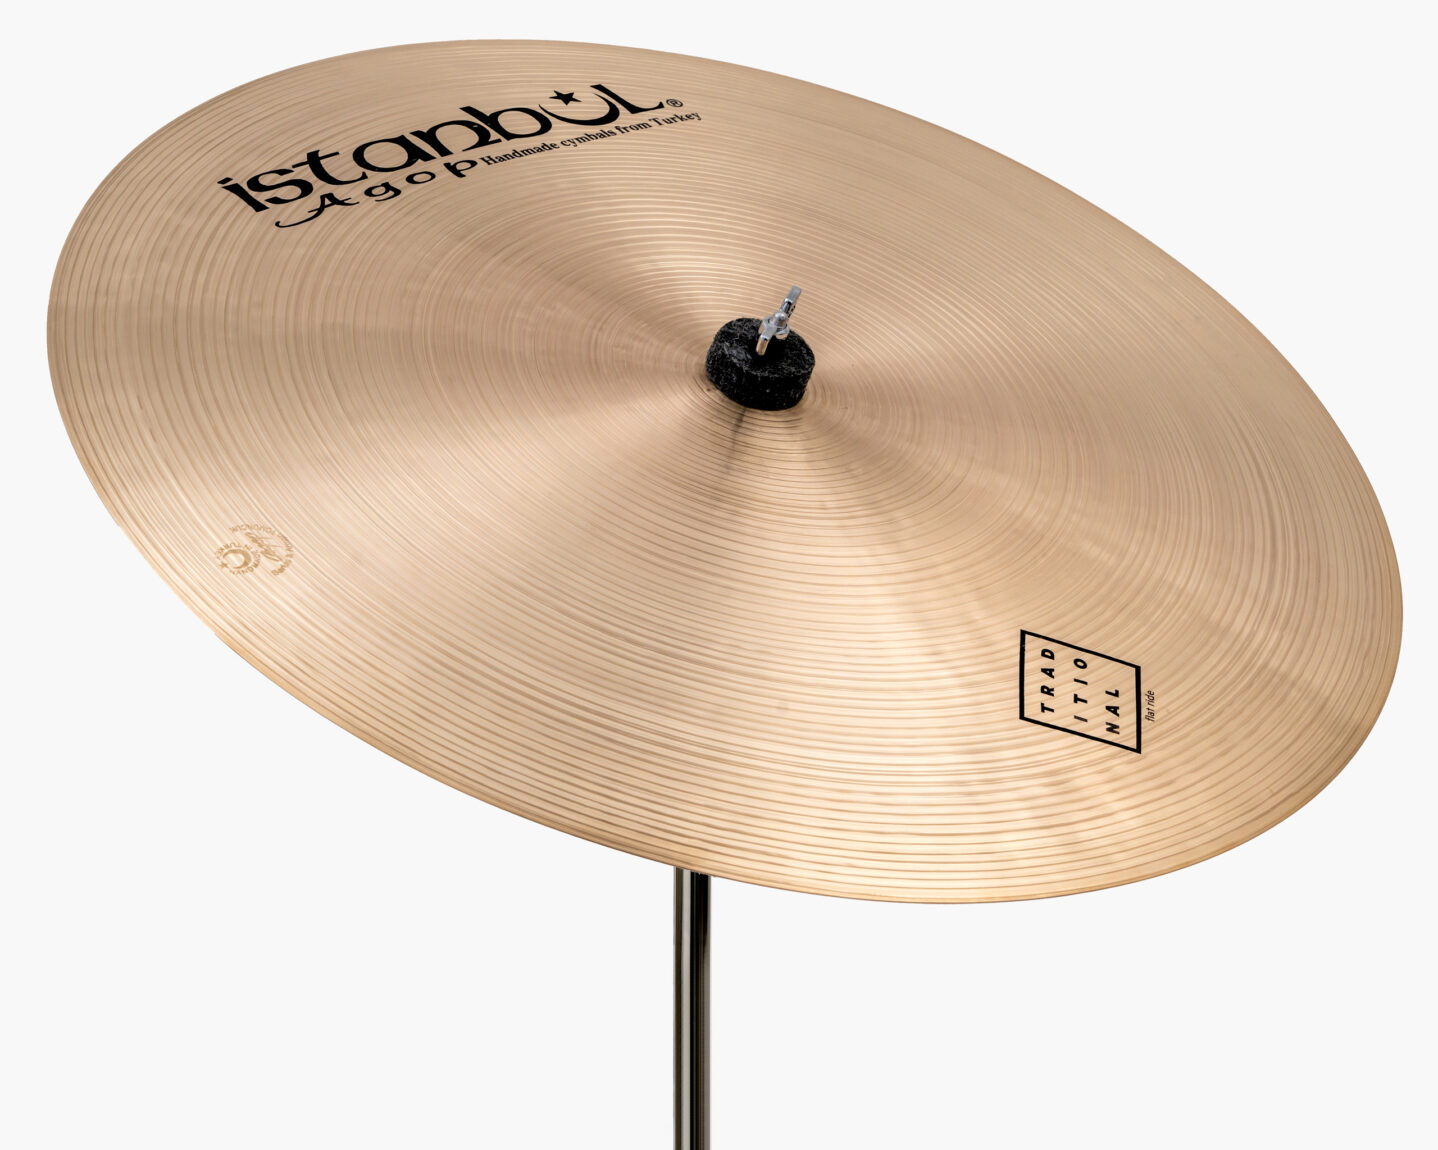 Istanbul Agop Traditional Flat Ride